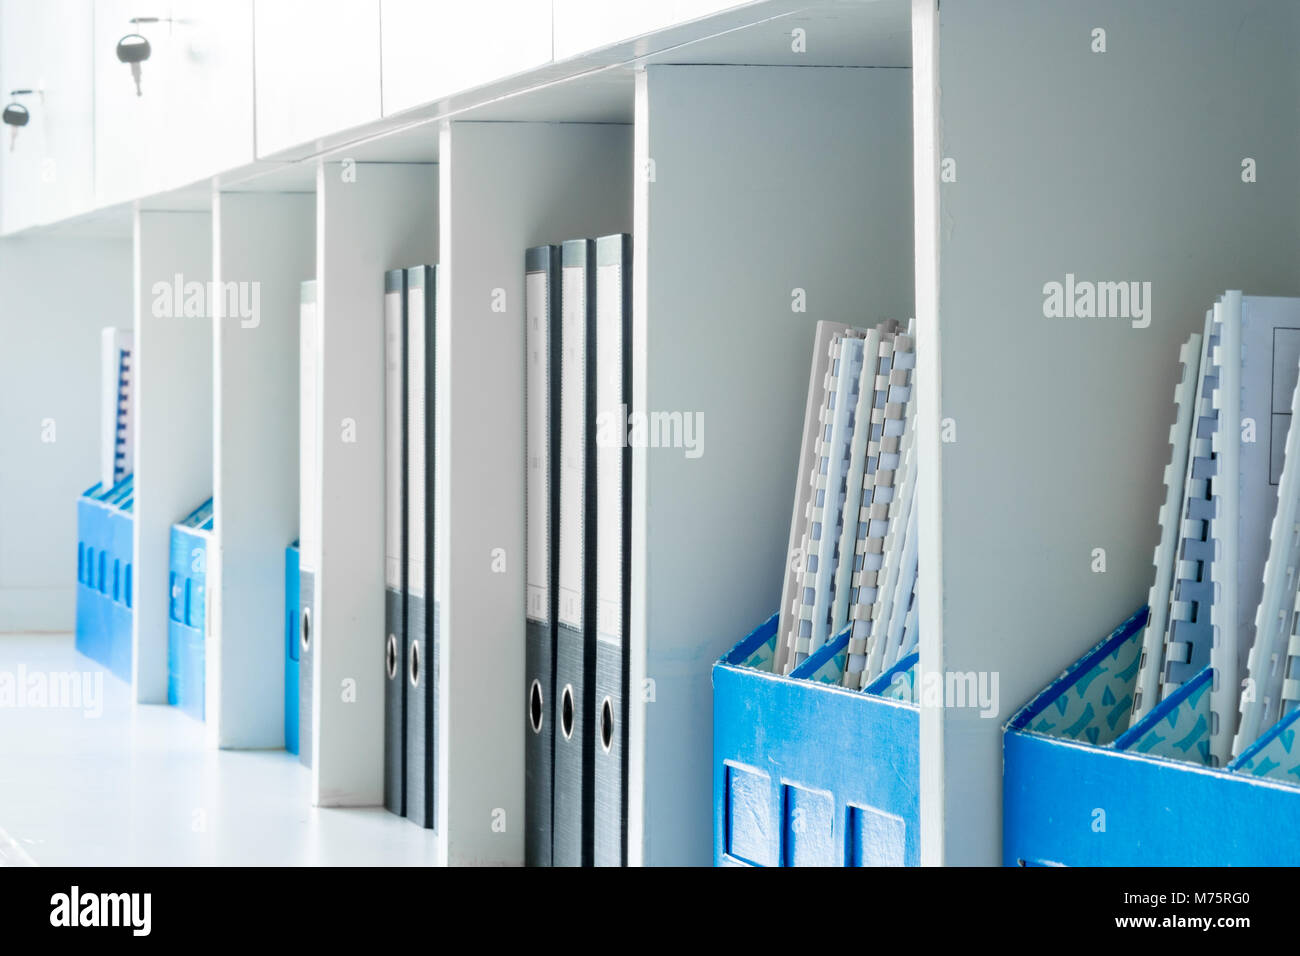 White office document cabinet, shelf and blue document boxes Stock Photo